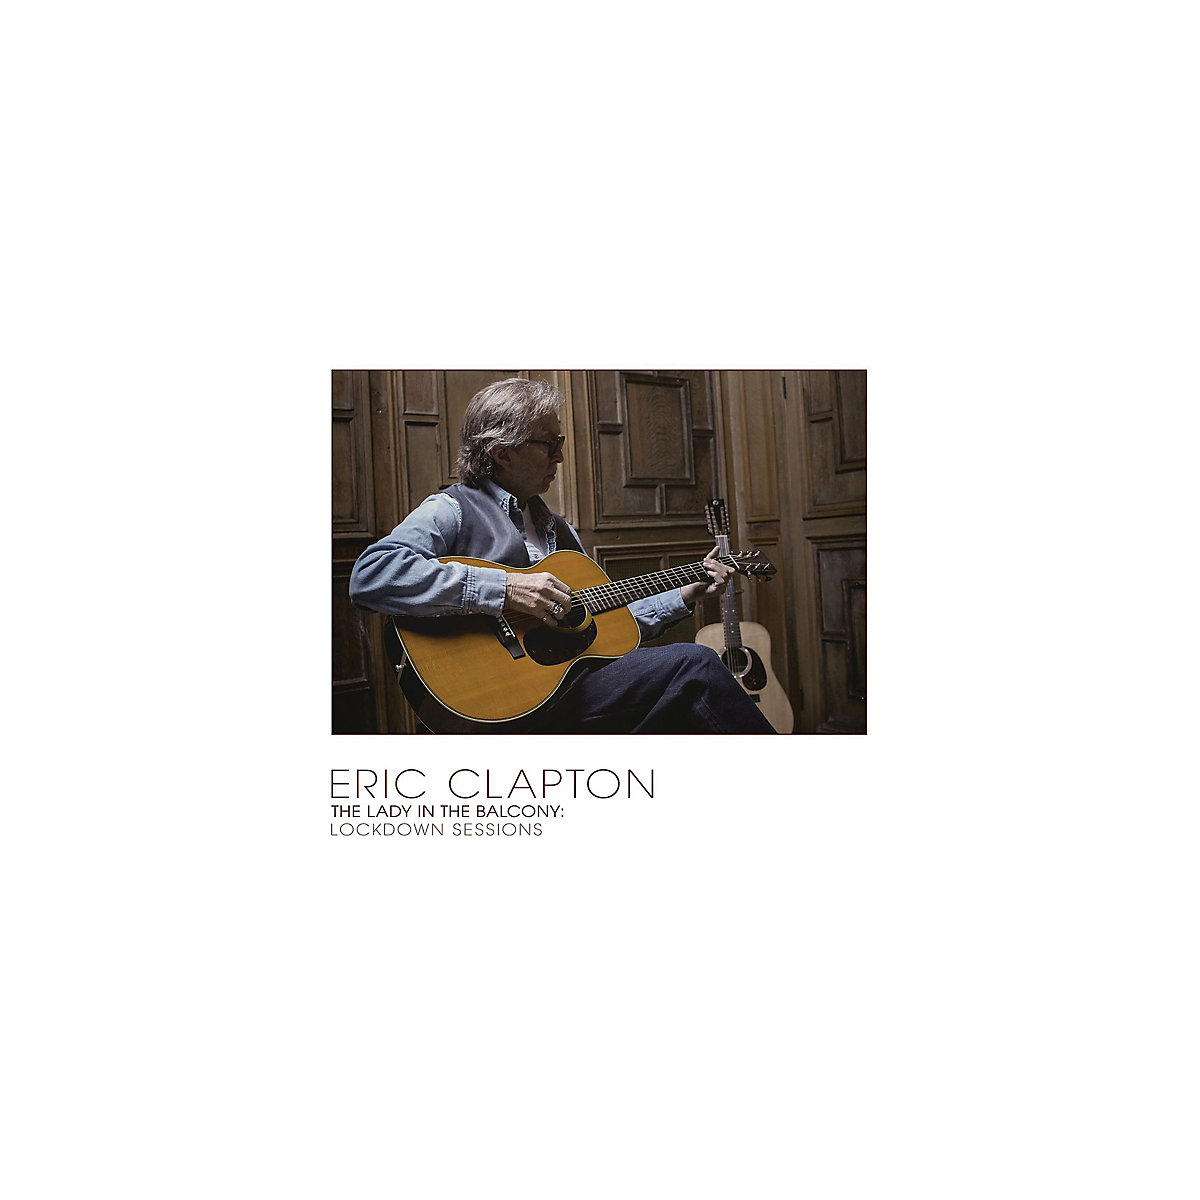 Universal CD Eric Clapton Lady in the Balcony Lockdown Session